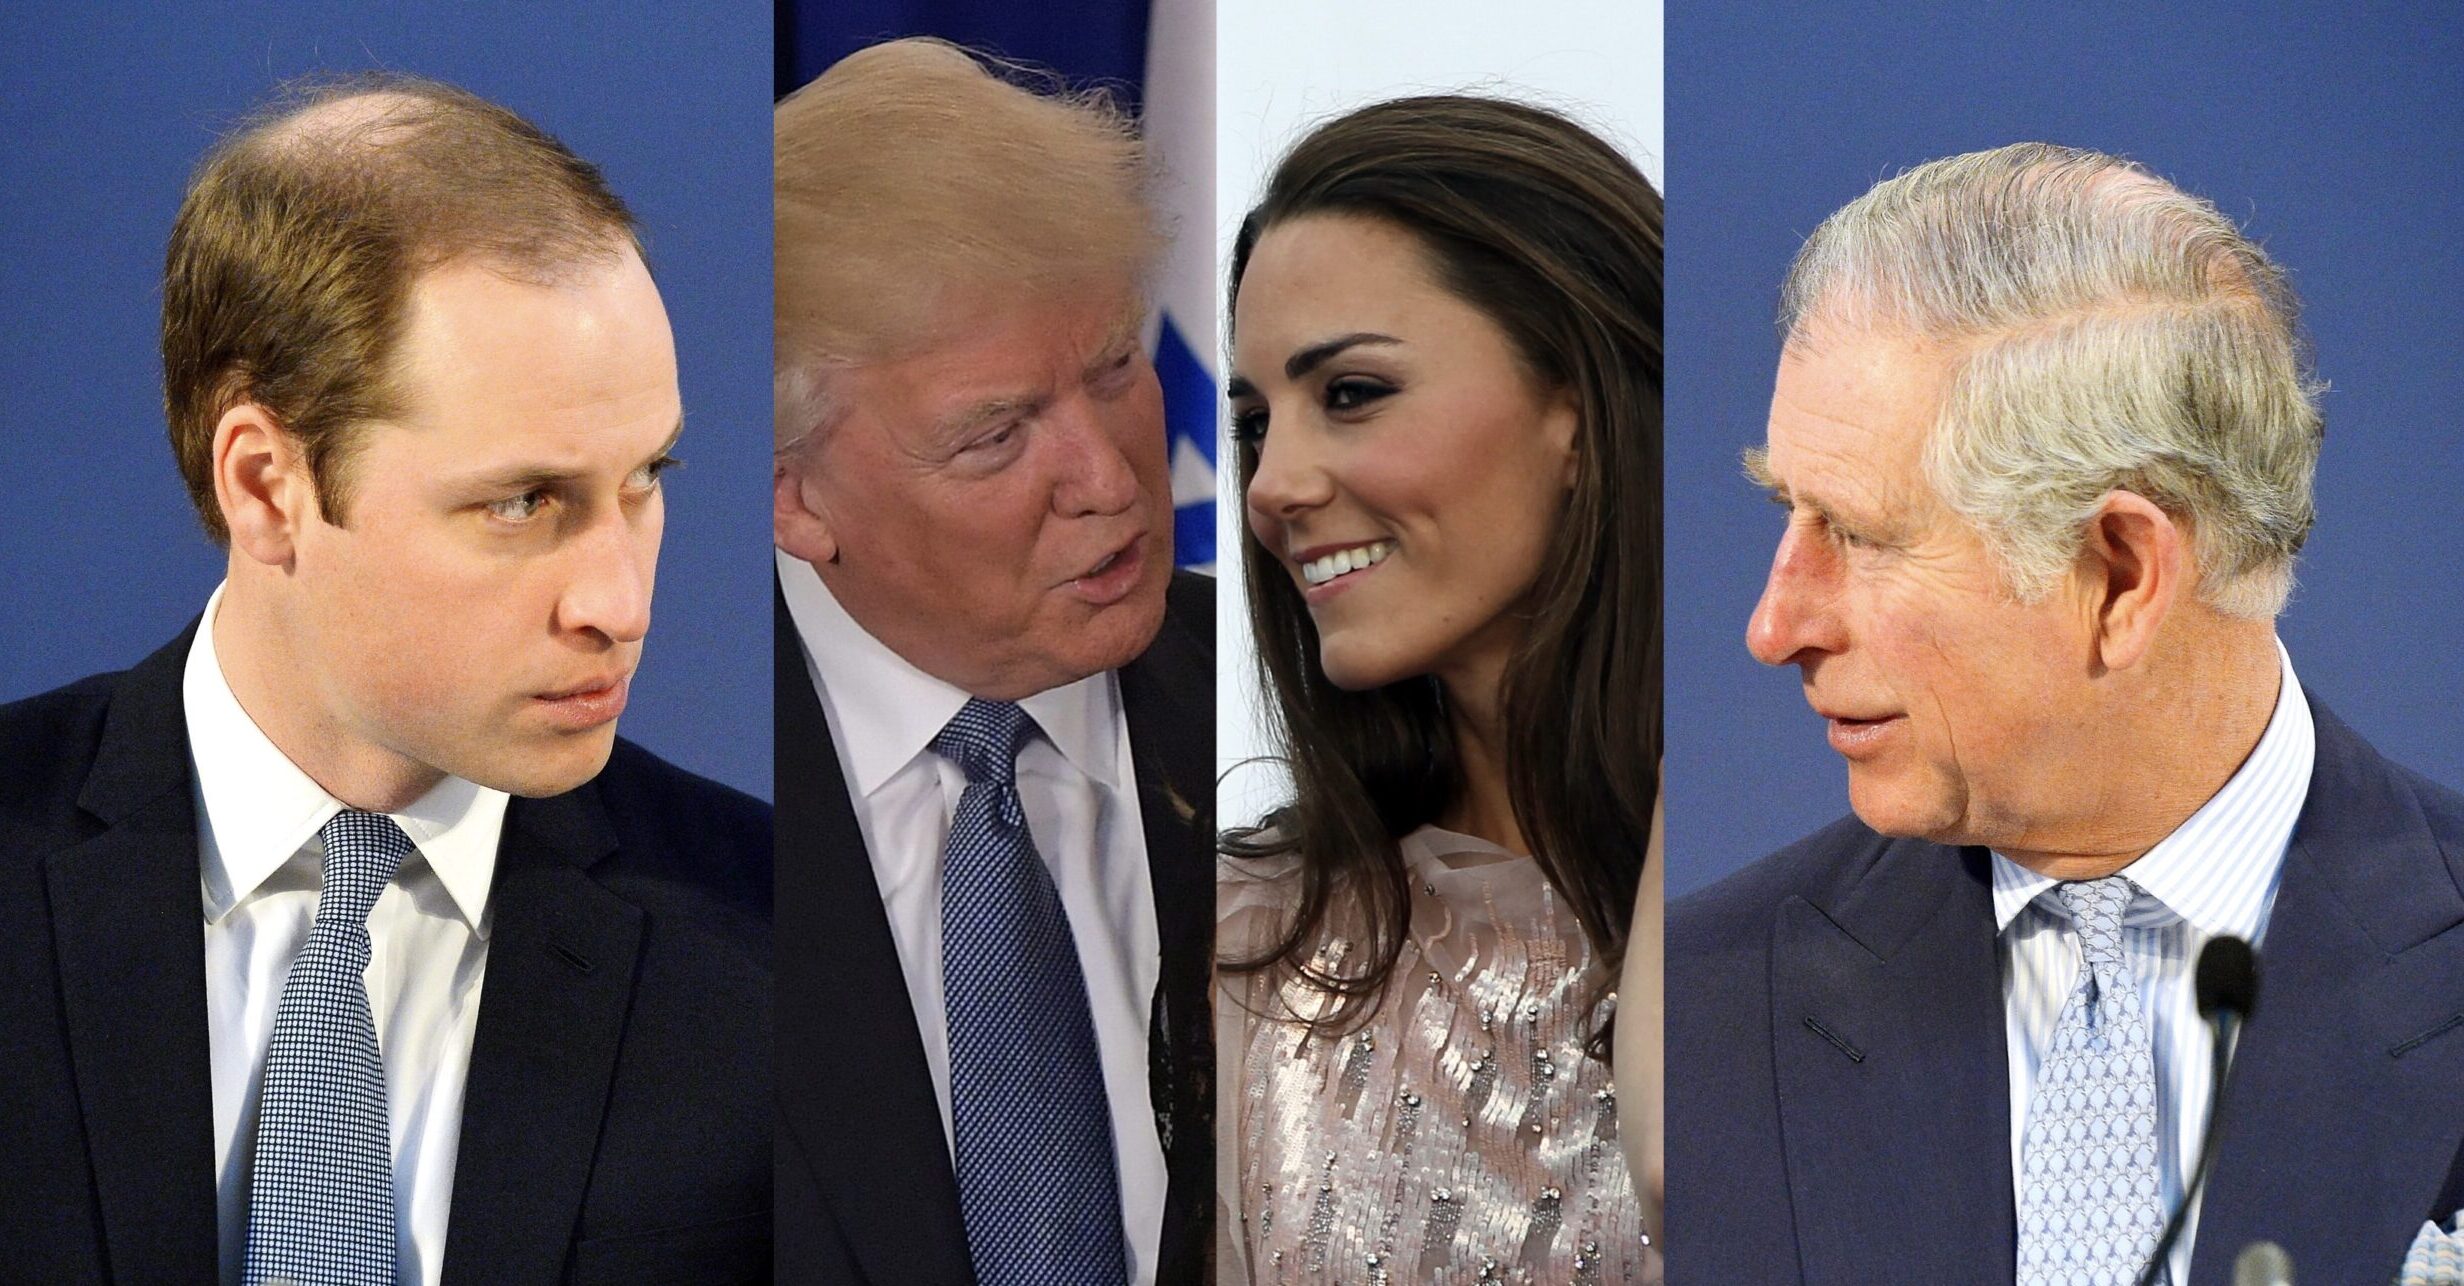 Trump Royally Pissed Off Charles and William By Asking ‘Who Wouldn’t’ Take Naked Pics of Kate Middleton Amid Scandal: Book (mediaite.com)